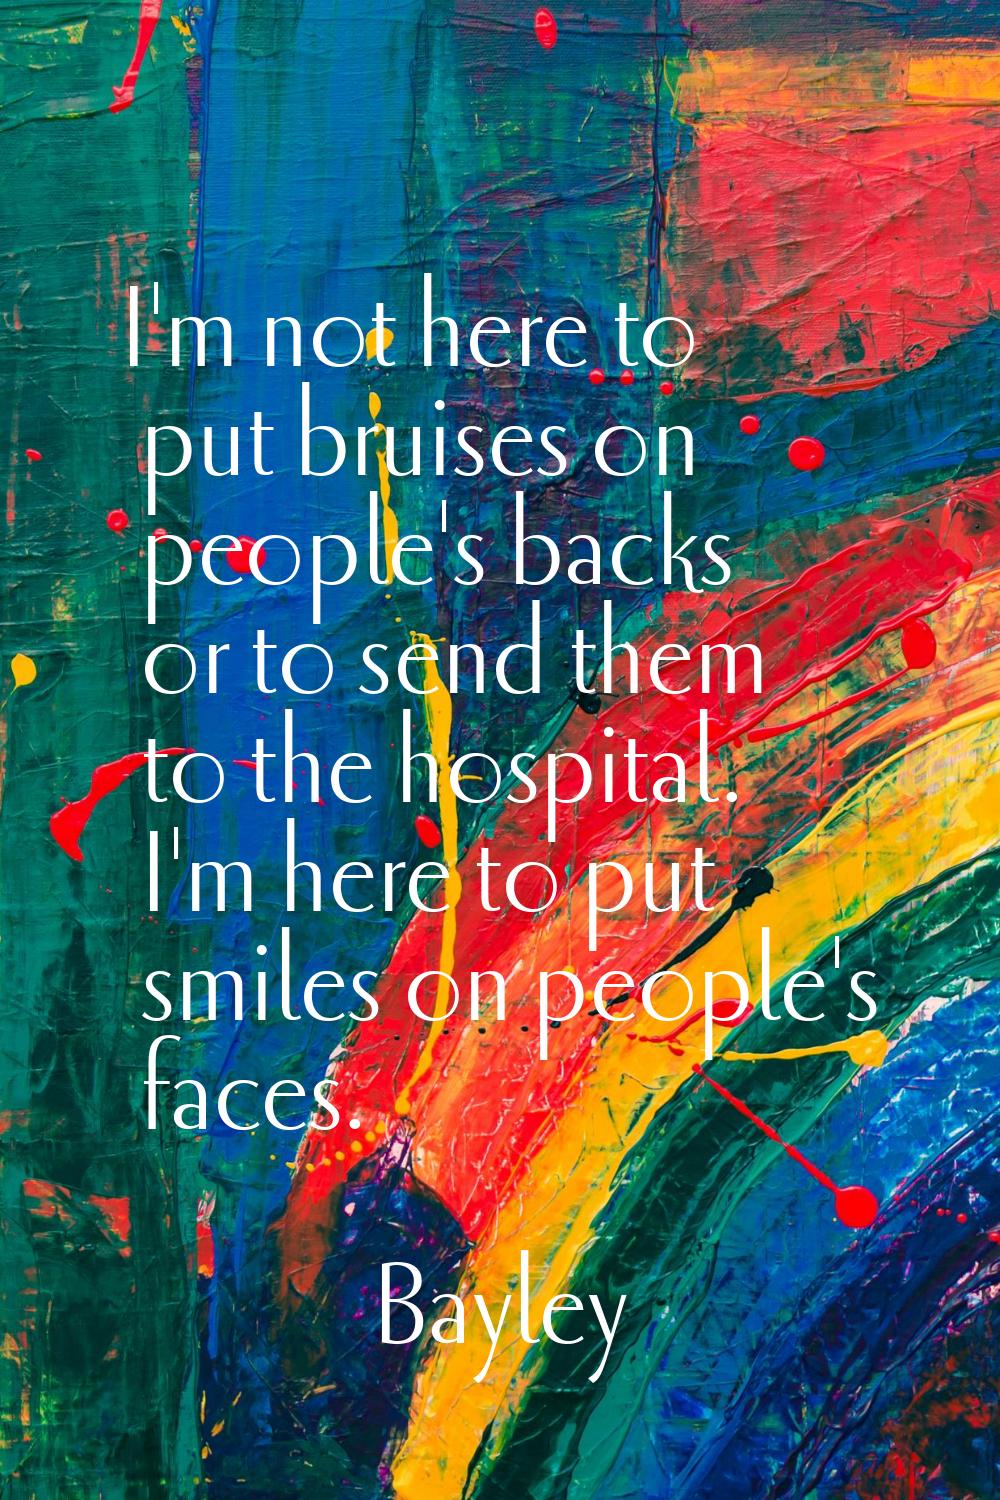 I'm not here to put bruises on people's backs or to send them to the hospital. I'm here to put smil